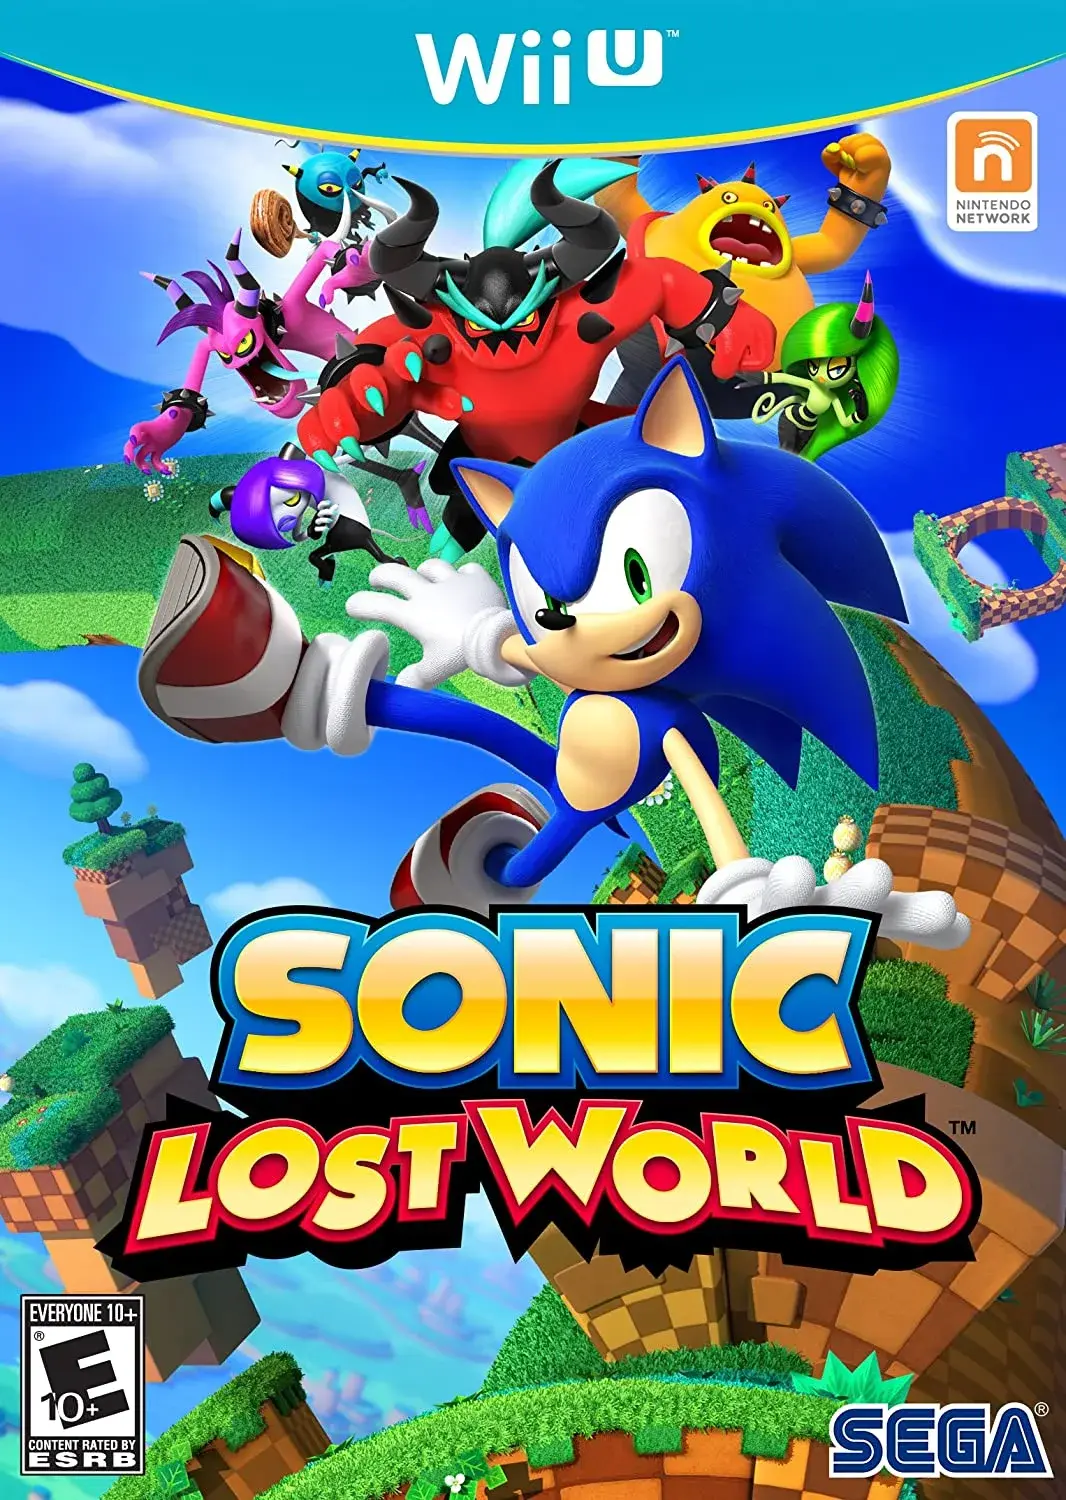 The world's worst Sonic The Hedgehog game is available again on